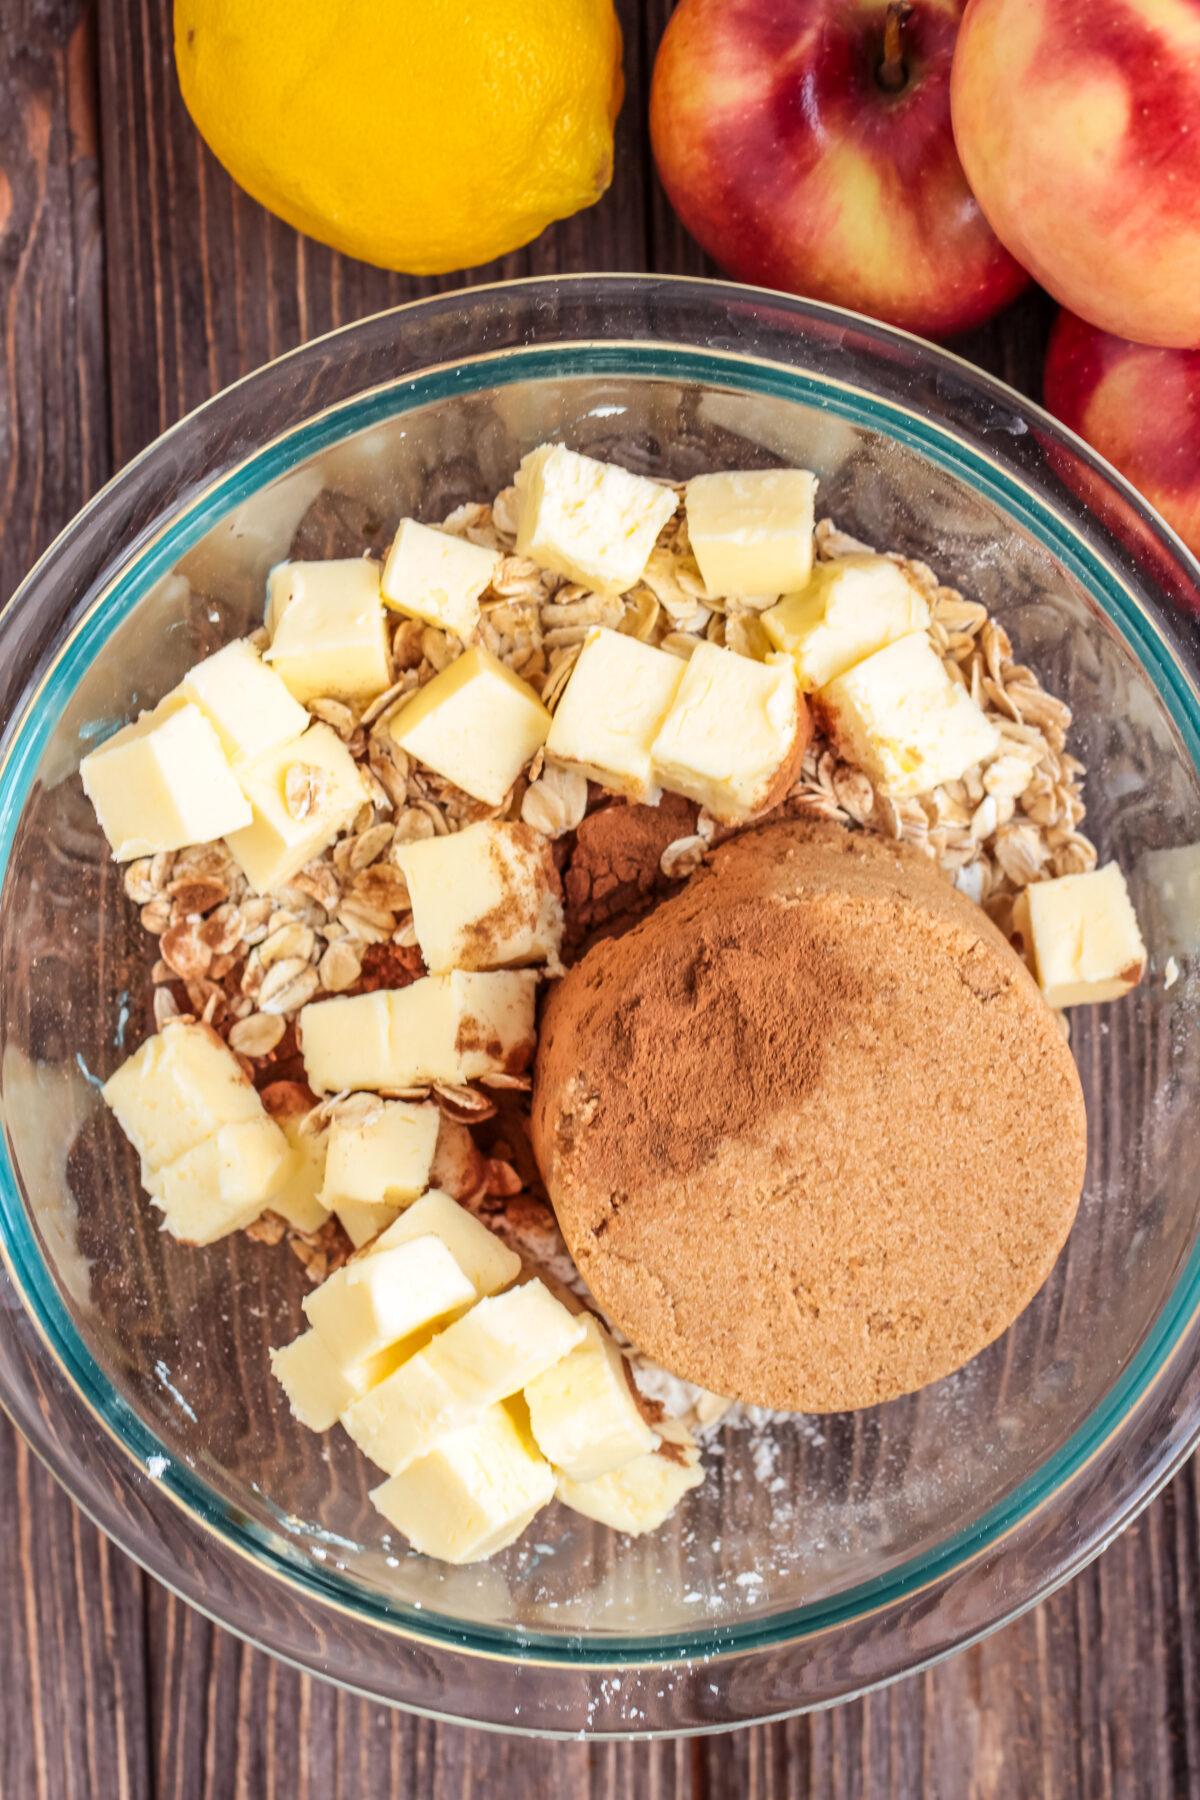 Apple crisp topping ingredients in a glass bowl.